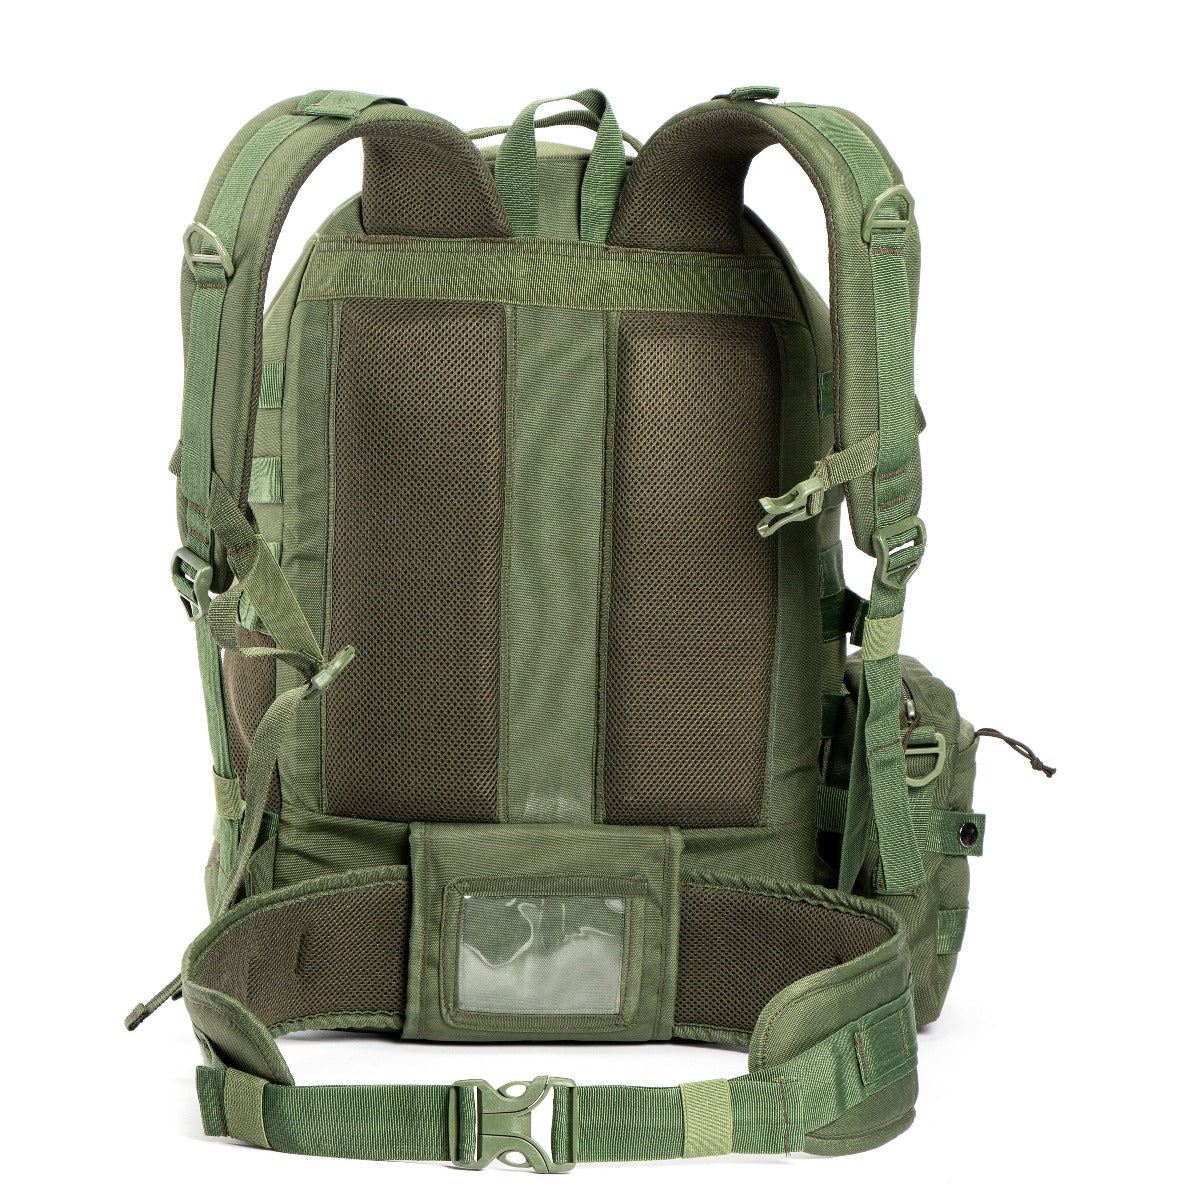 Tripole Alfa Military Tactical Backpack with Sling Bag Attachment -  46 Litres - Army Green 4